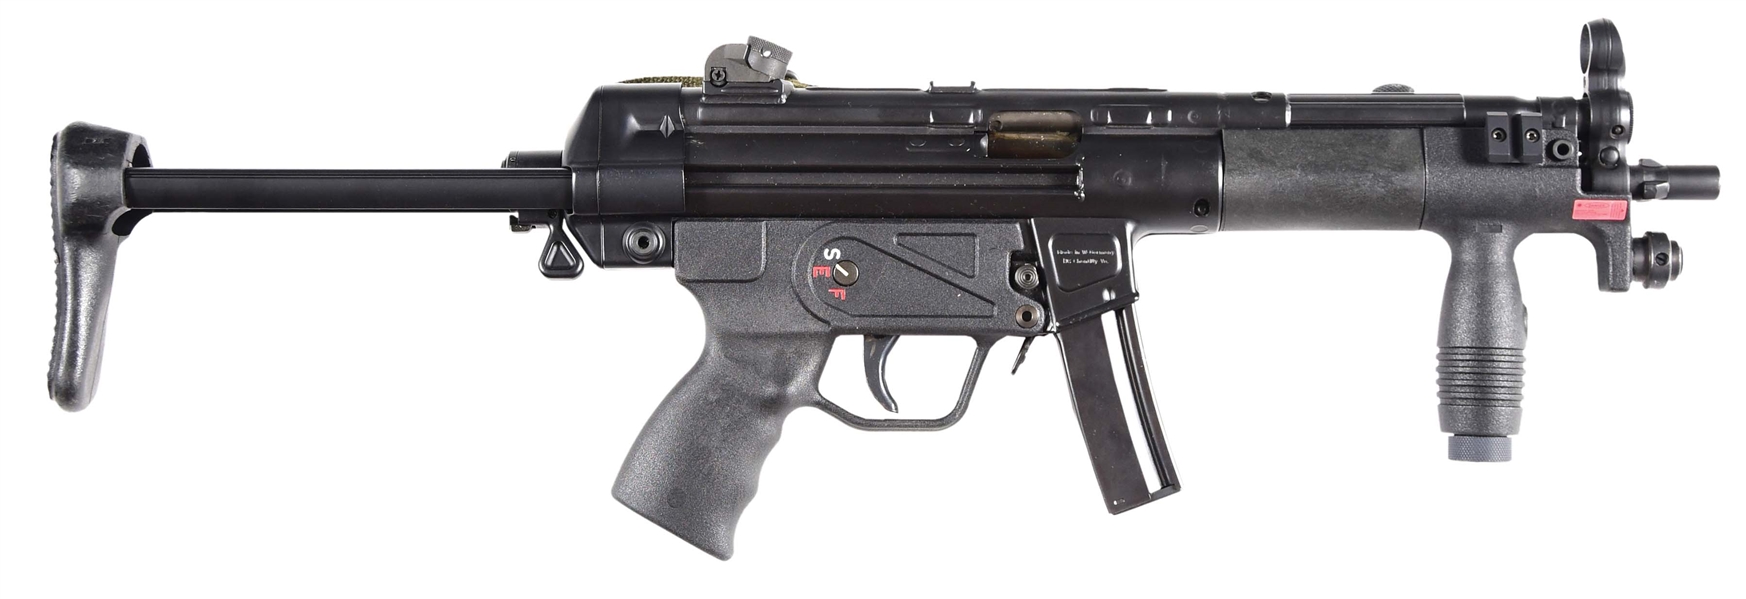 (N) ABSOLUTELY SUPERB HIGHLY SOUGHT QUALIFIED MANUFACTURING 3 POSITION AUTO SEAR PACK ON HOST HK-94 CONVERTED TO MP-5K MACHINE GUN (FULLY TRANSFERABLE).